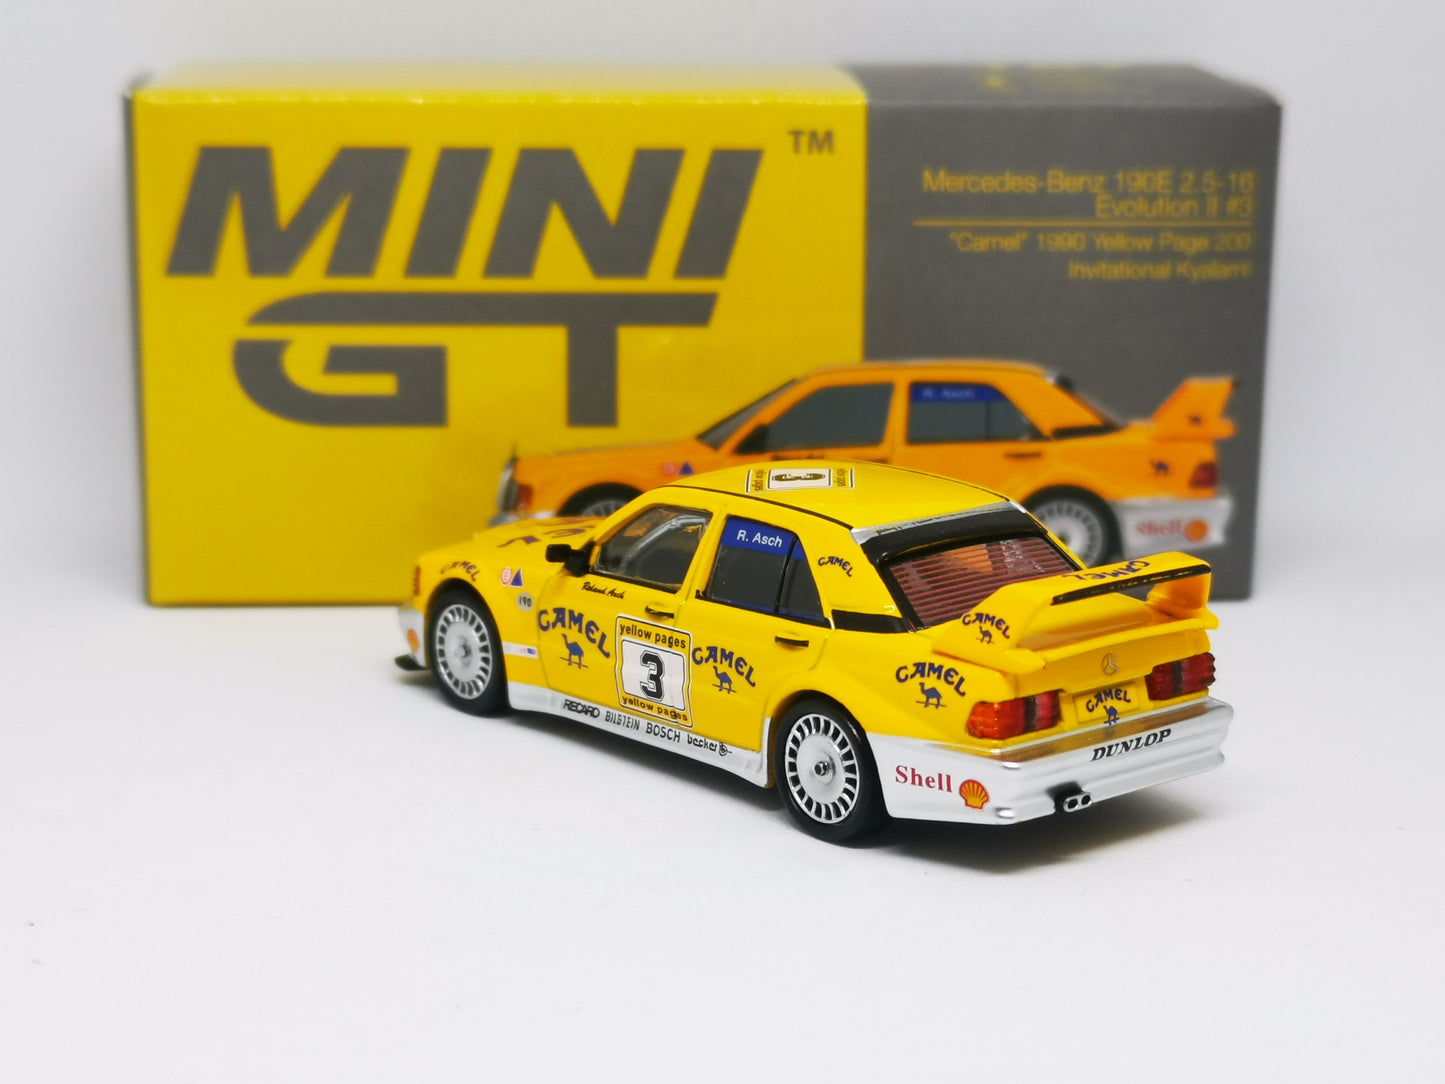 MINI GT 1:64 Mercedes-Benz 190E 2.5-16 Evolution II #3 Camel 1990 Yellow Page 200 Invitational Kyalami LHD ( With Extra Label)